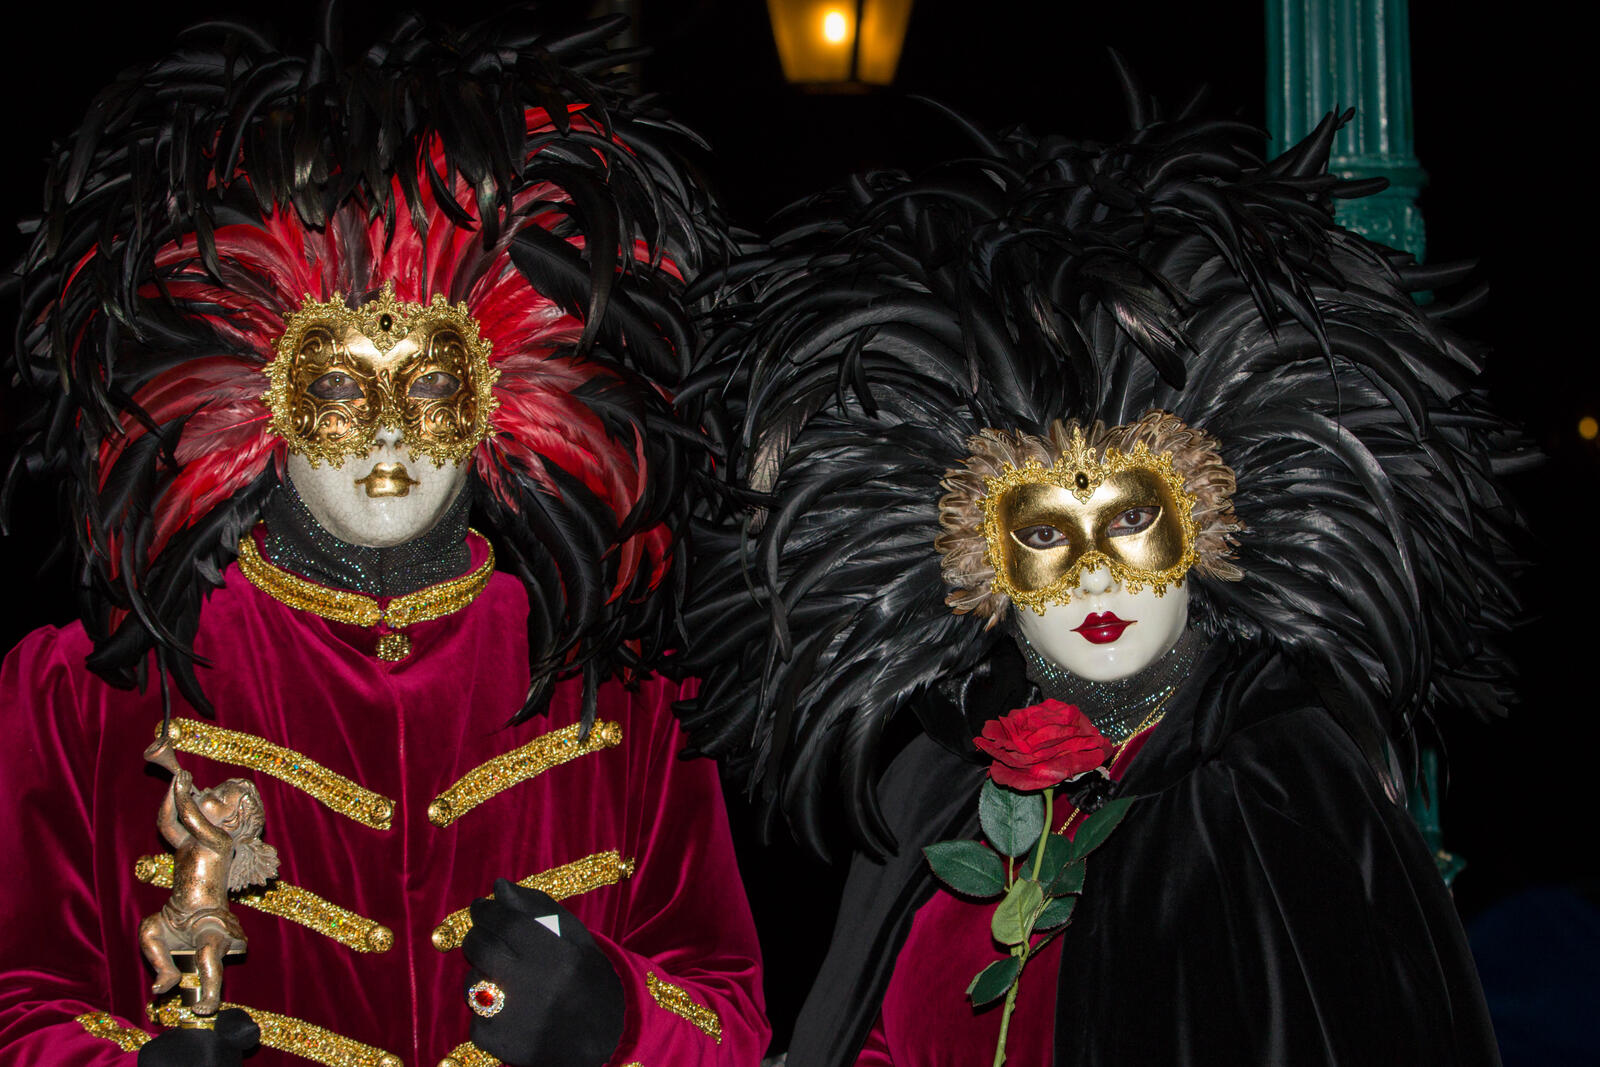 Wallpapers carnival venice italy on the desktop